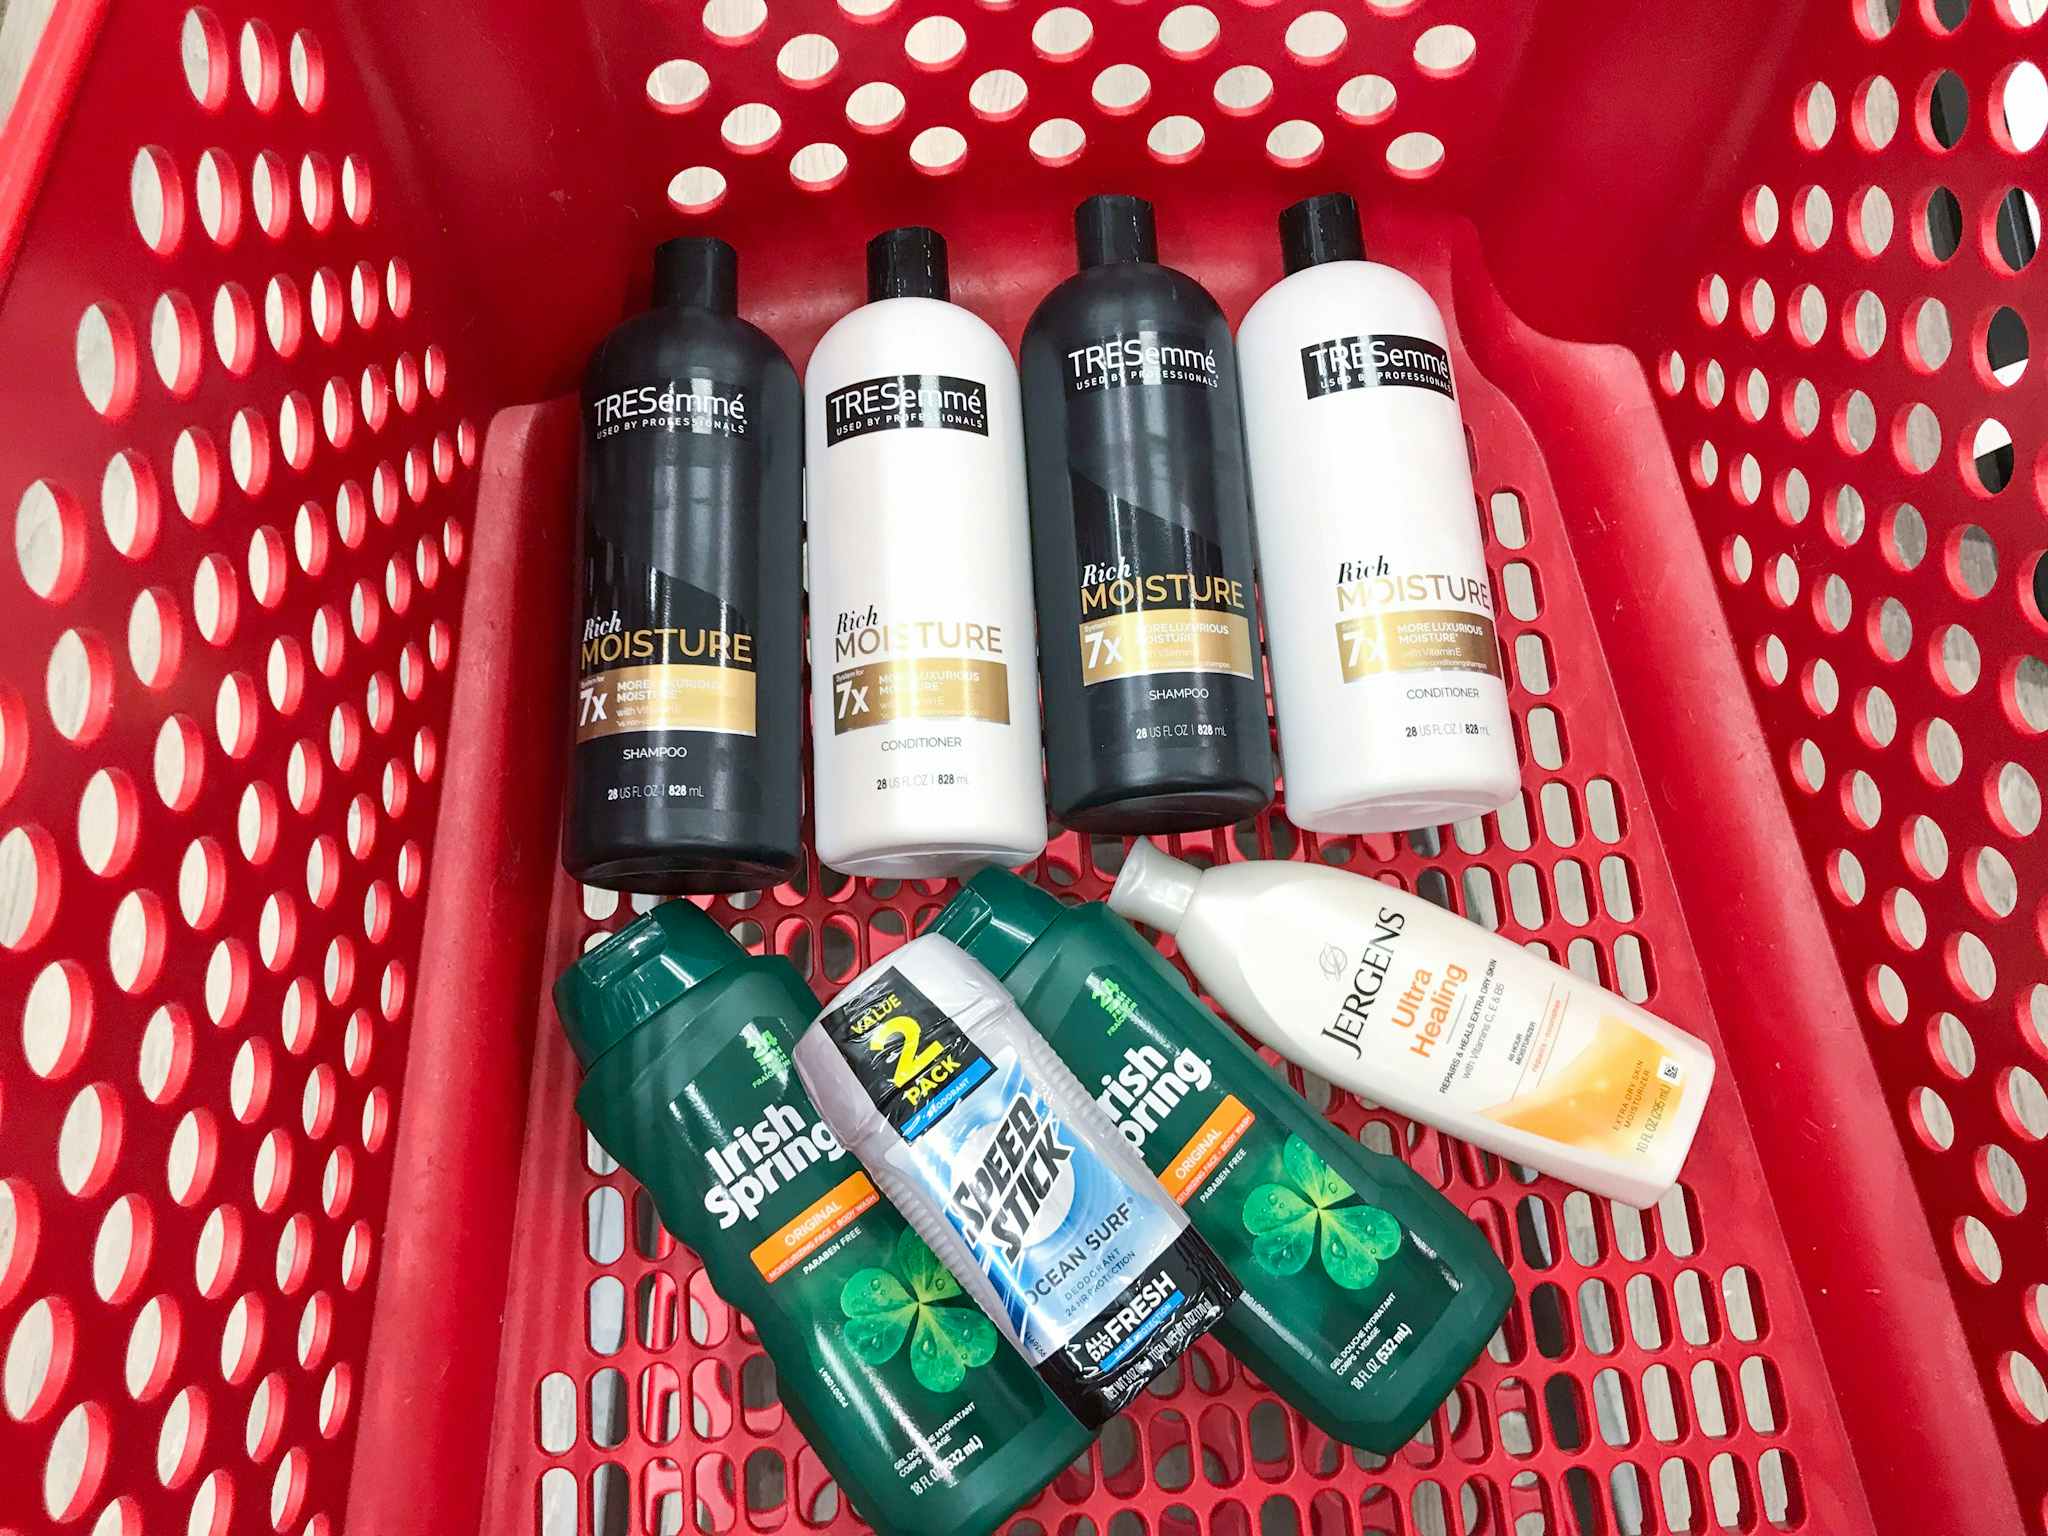 tresemme irish spring speed stick and jergens target shopping haul